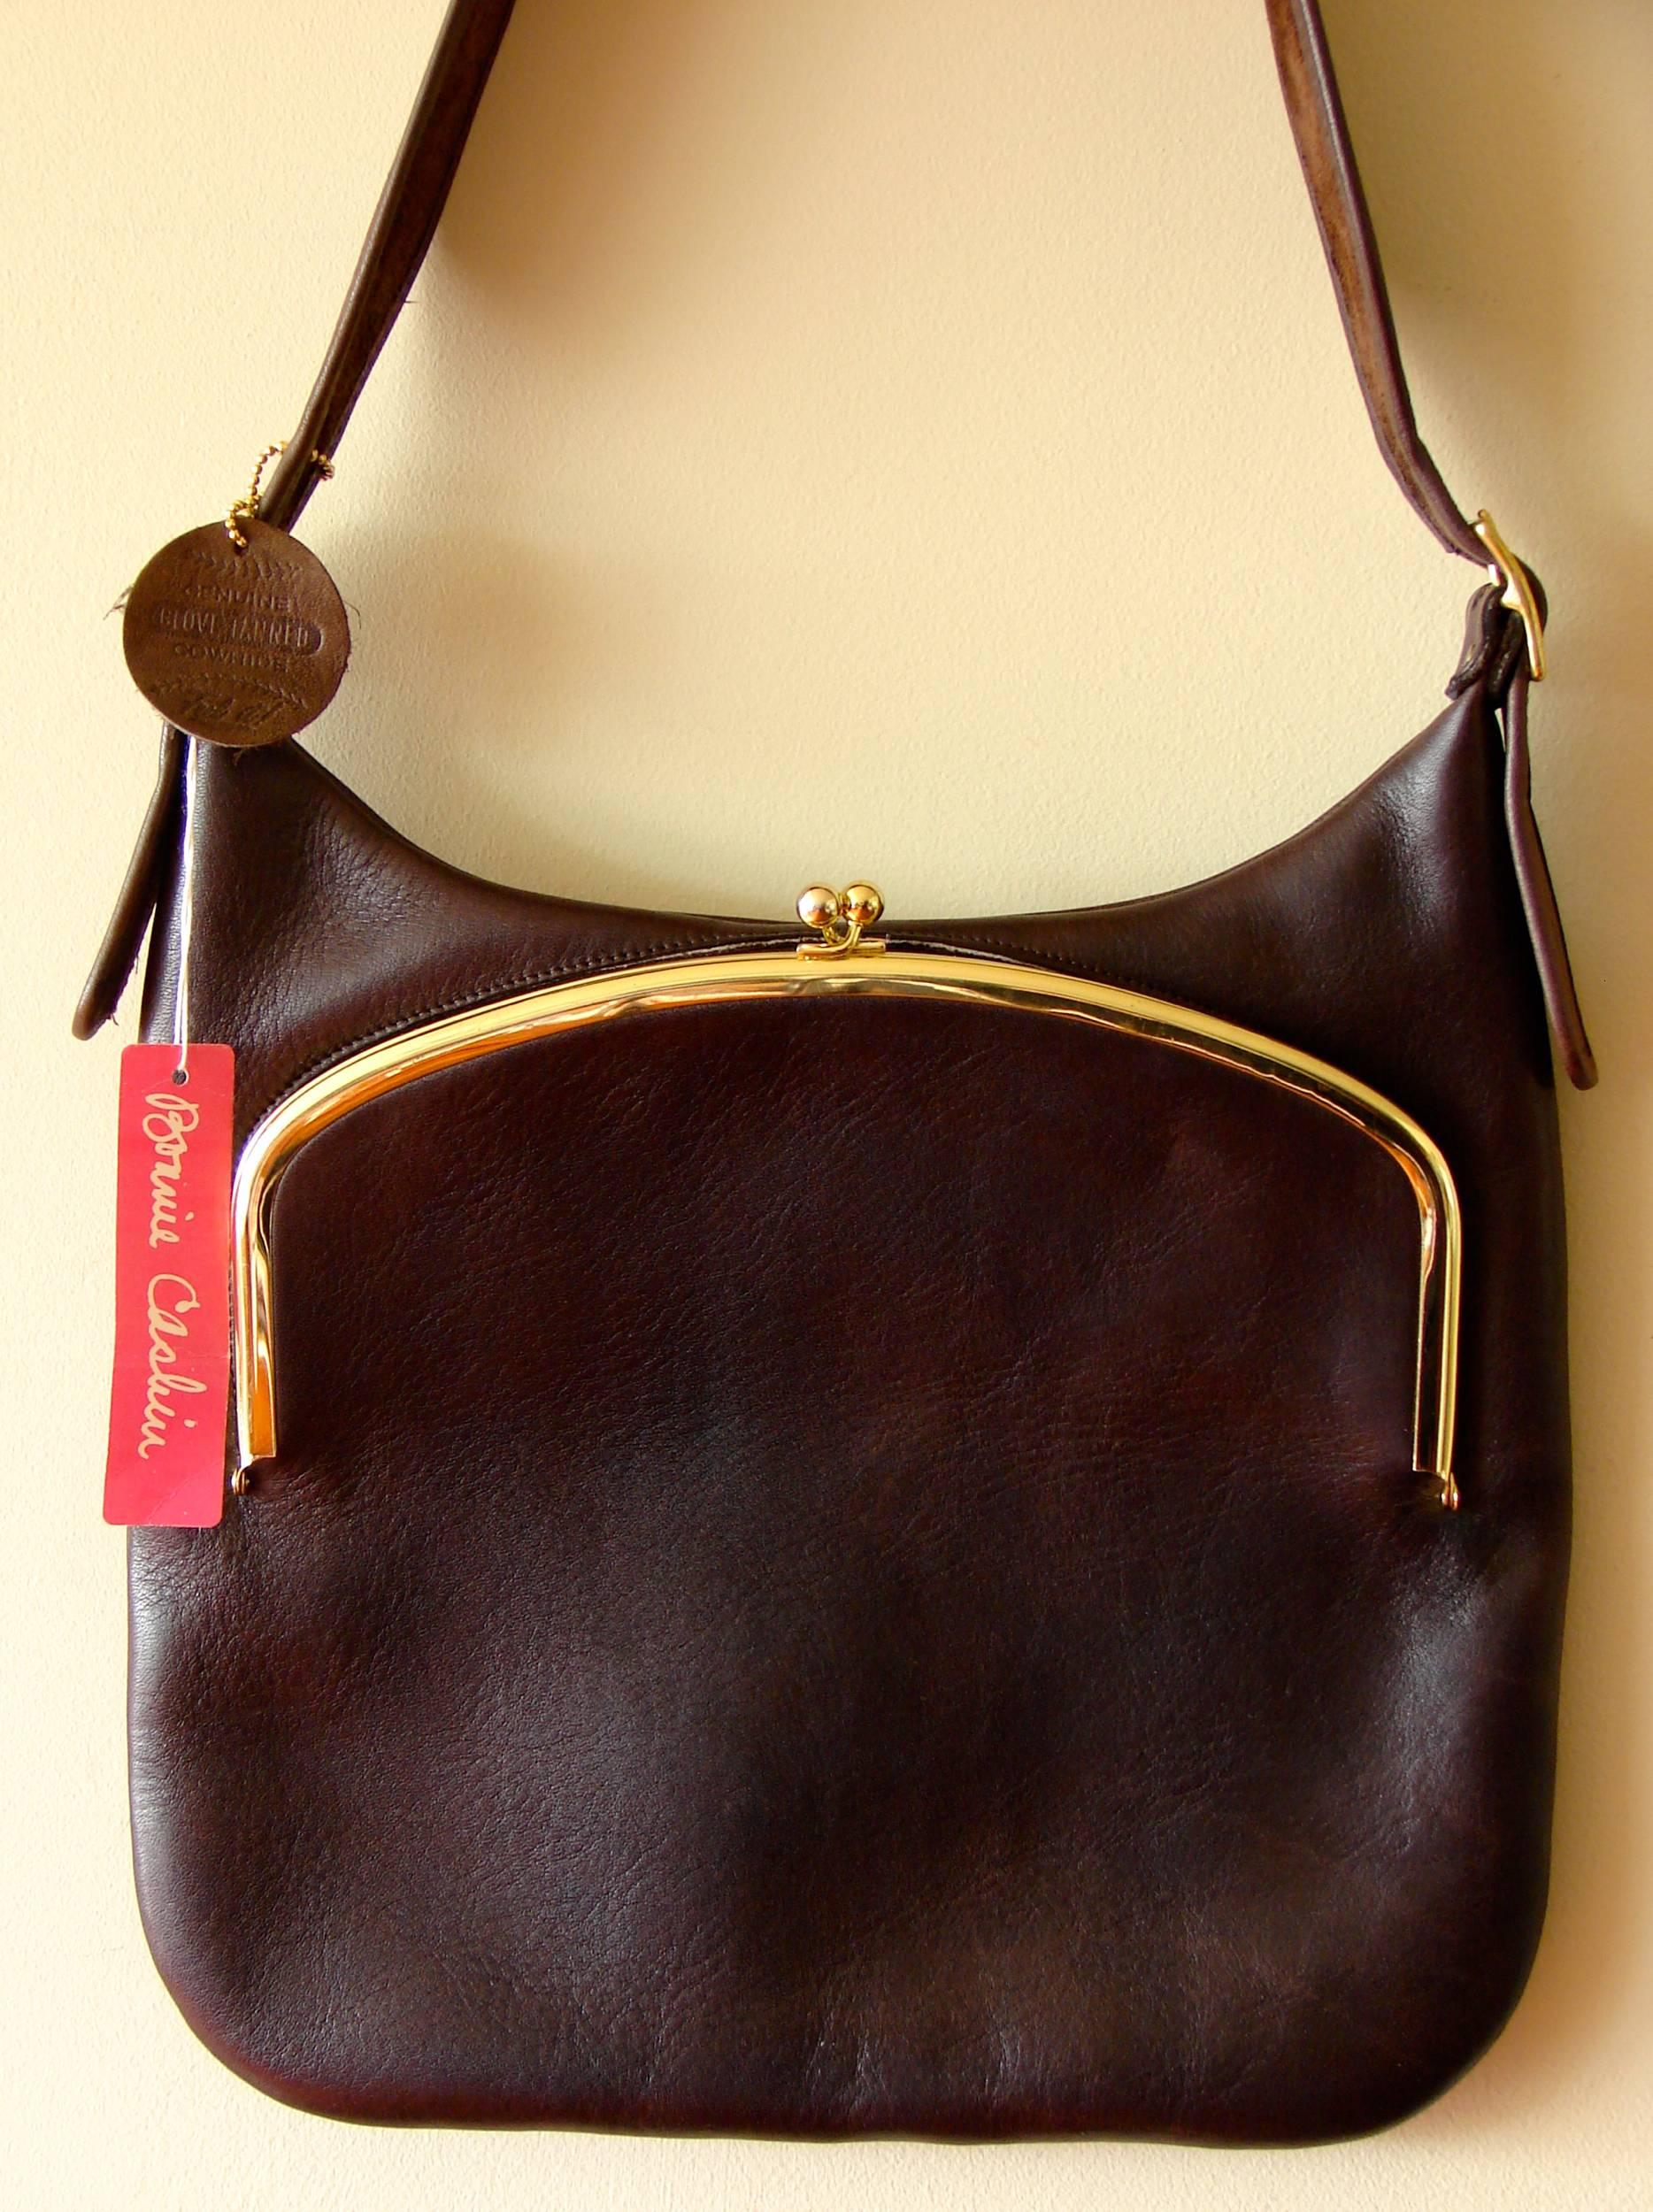 Here's a hard to find leather bag from Bonnie Cashin for Coach Leatherware.  This piece is deadstock - never used and in excellent condition.  It features the very hard to find baseball shaped leather hang tag as well as Bonnie's pink hang tag